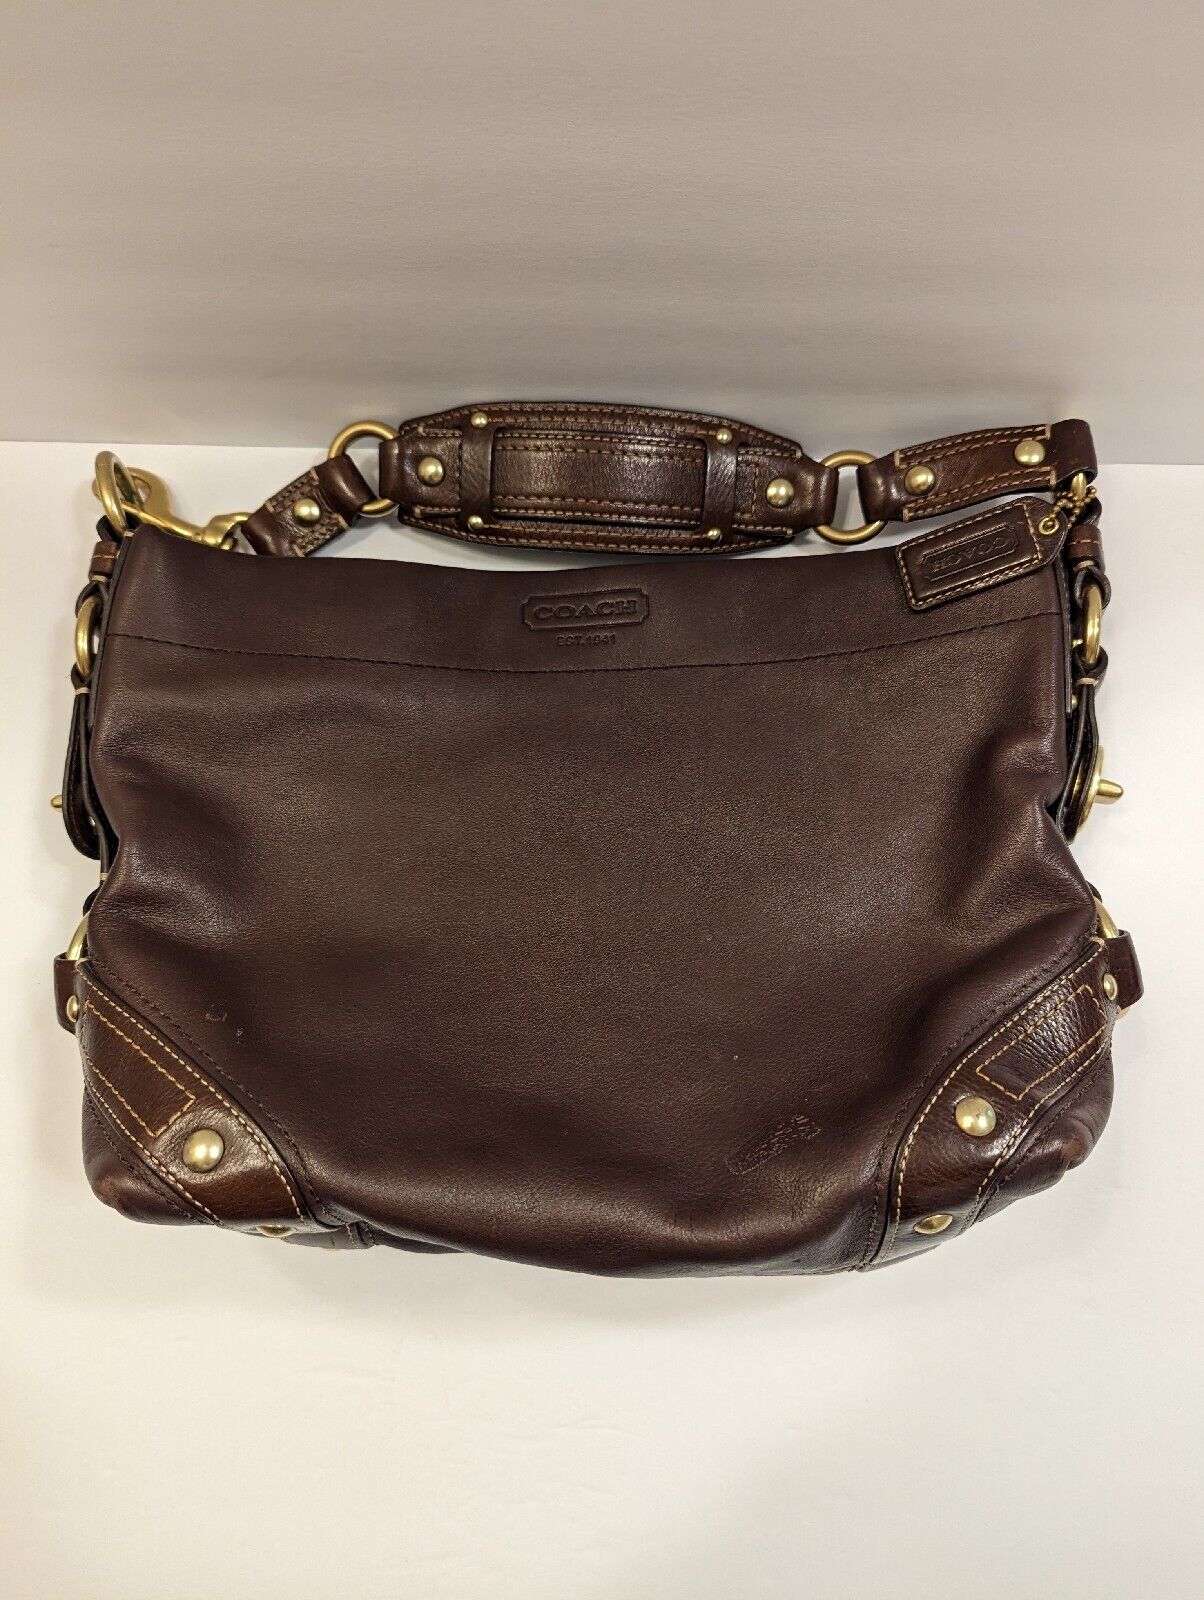 Coach Carly #10615 Chocolate Brown Soft Leather Hobo … - Gem